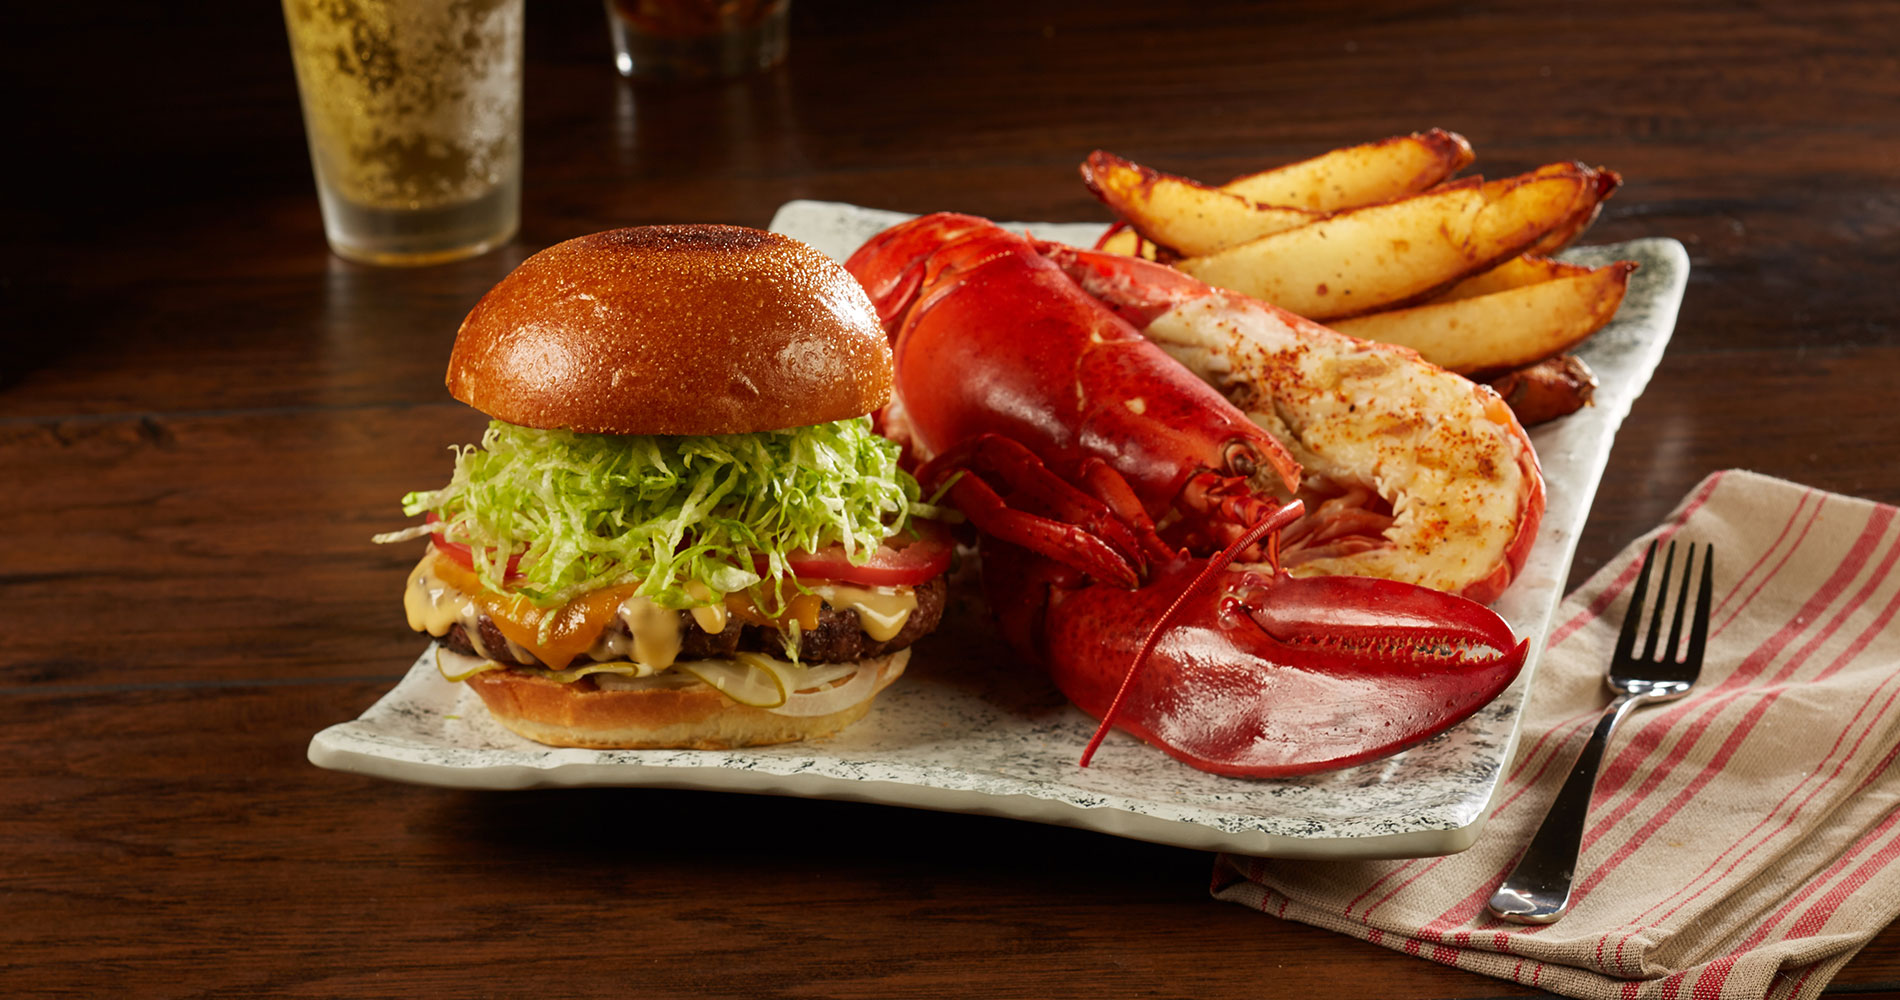 Burger, fries and a lobster